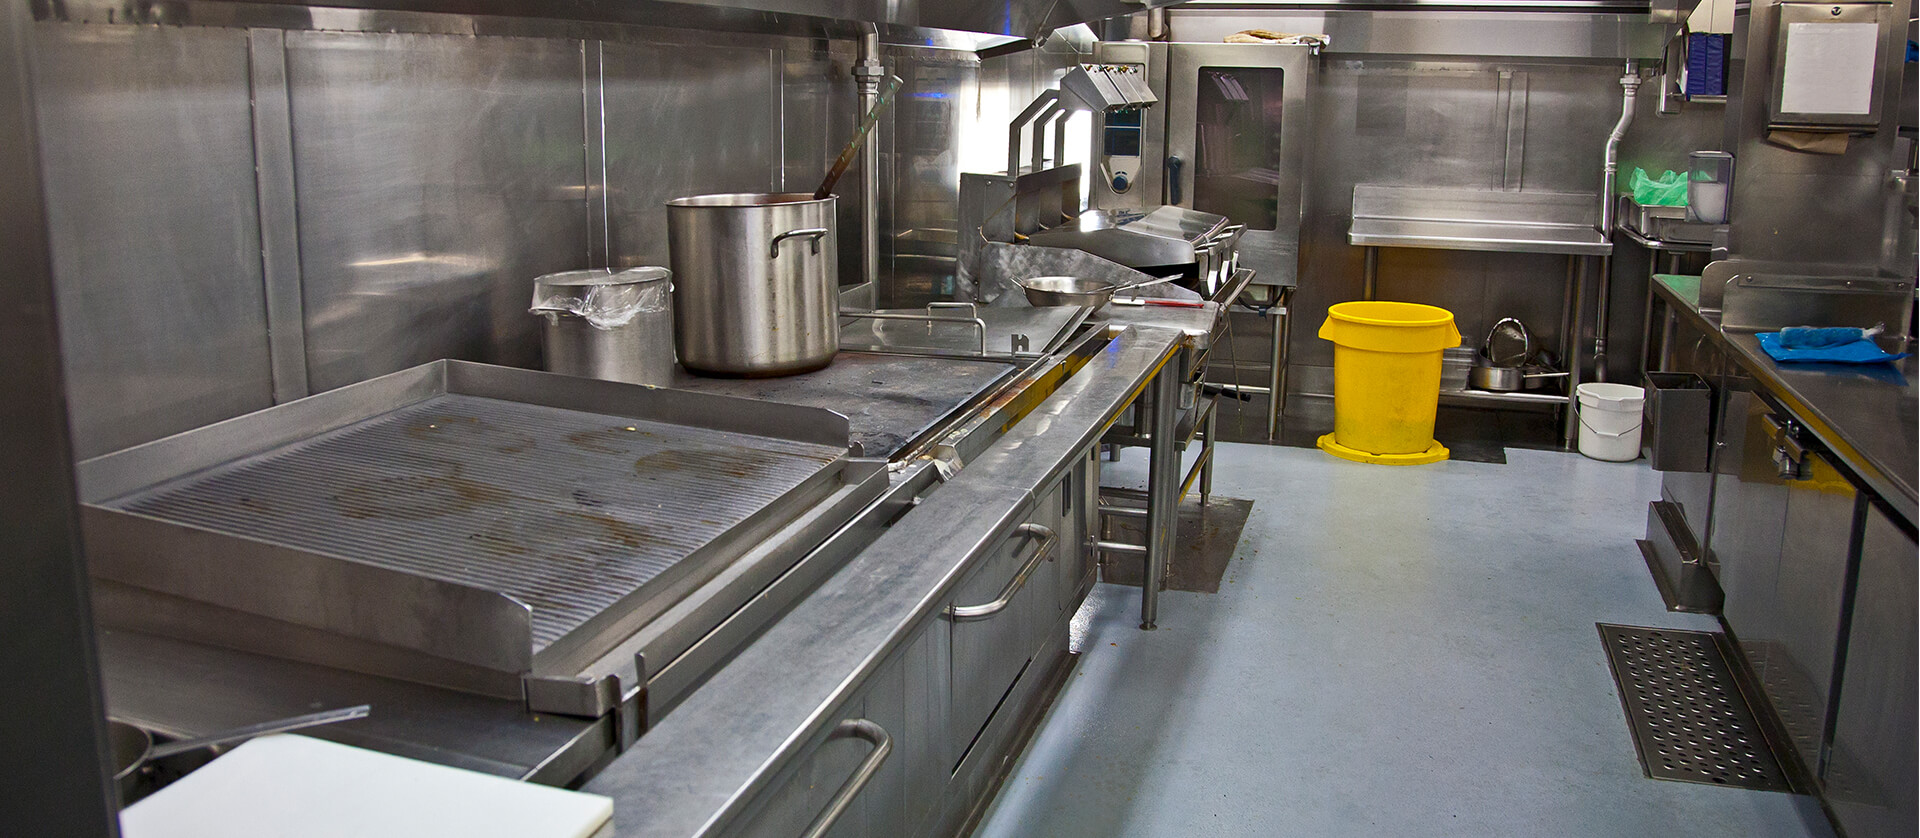 Interior photo of a commercial kitchen.